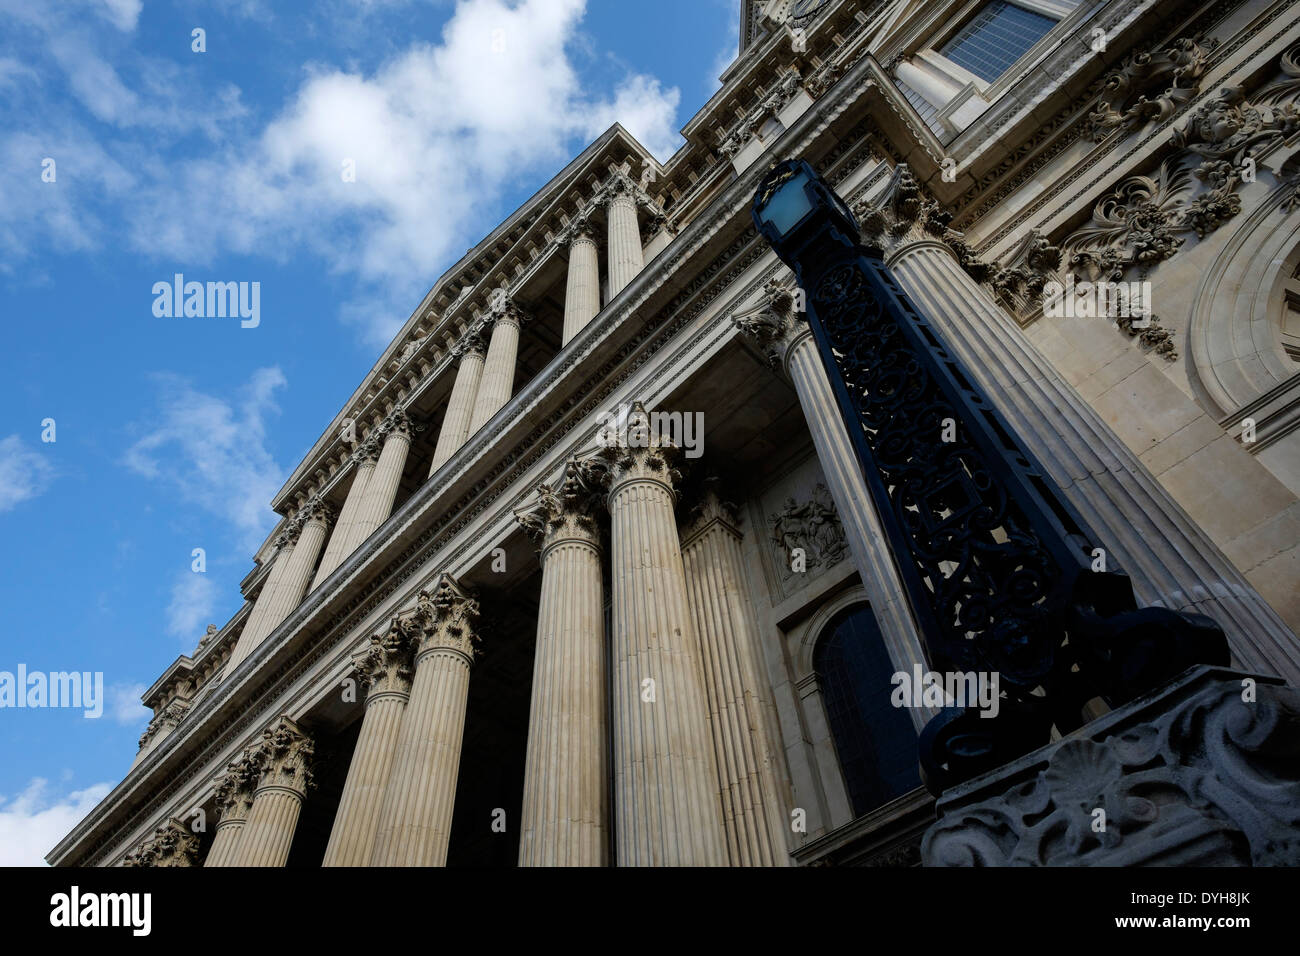 St Paul's cathedral in London Stock Photo